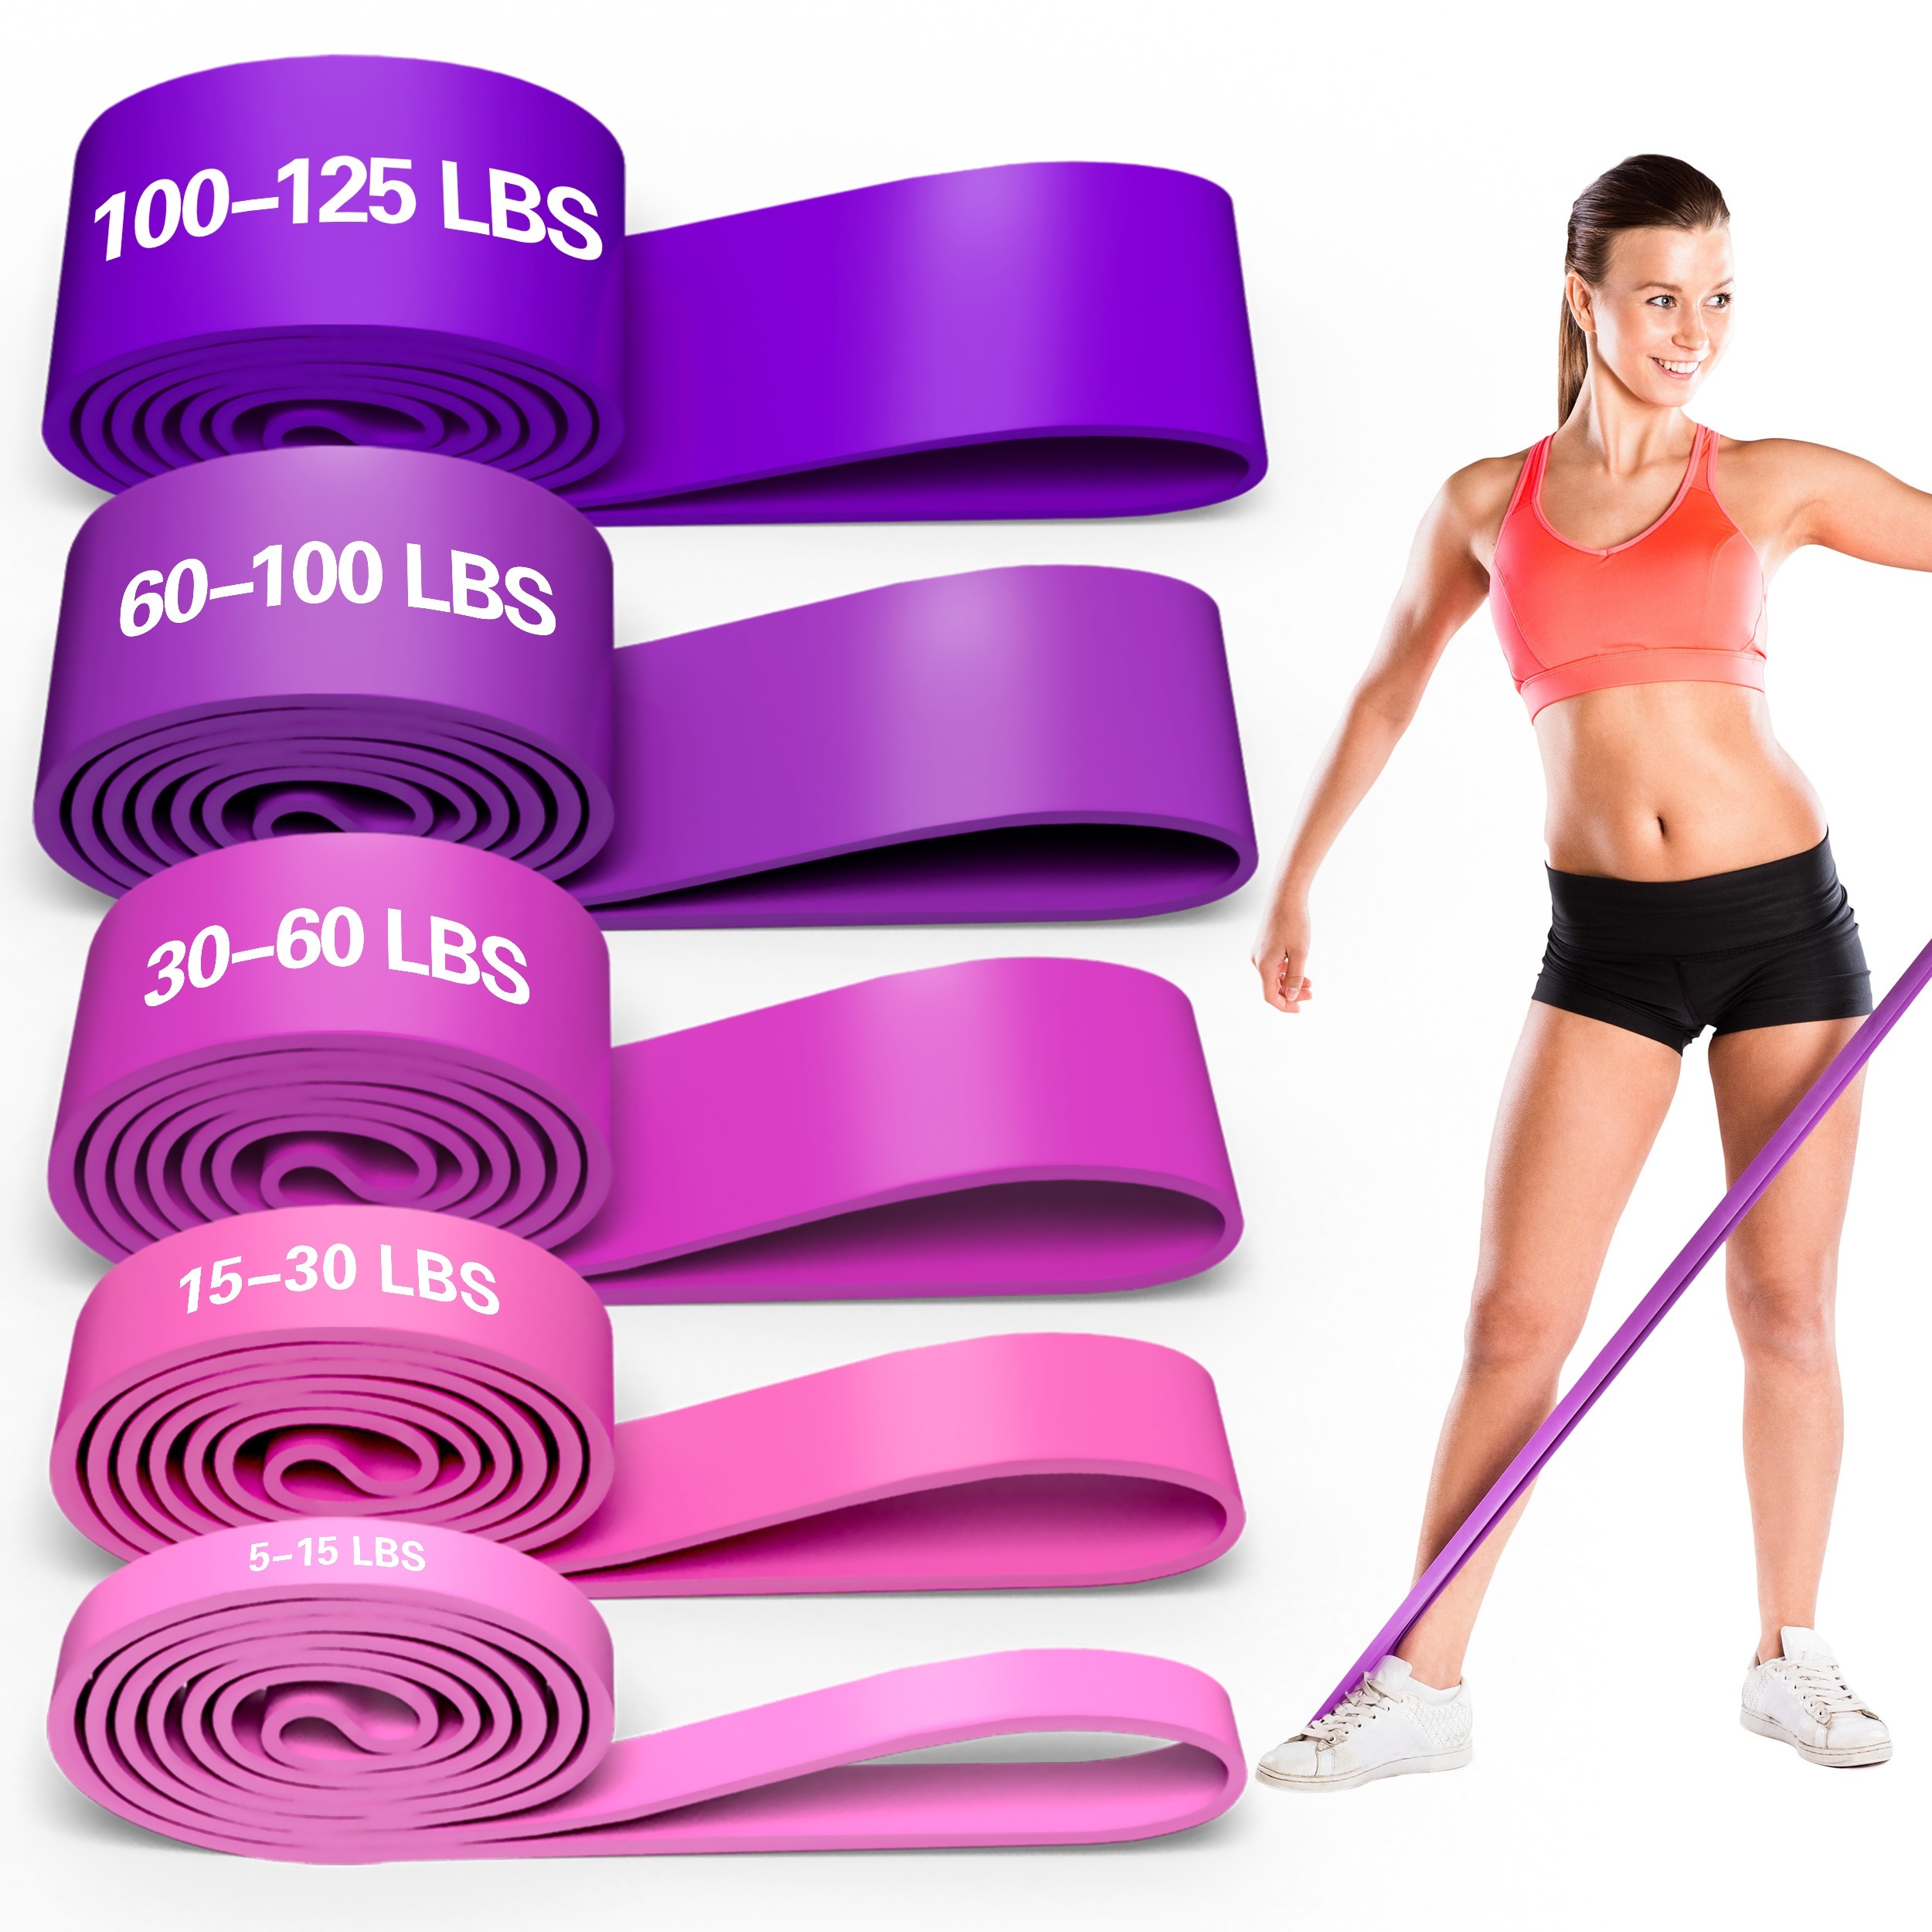 

5pcs/set Sports Yoga Resistance Bands, Fitness Pull Belt, Suitable For Yoga, Strength Training, Body Stretching